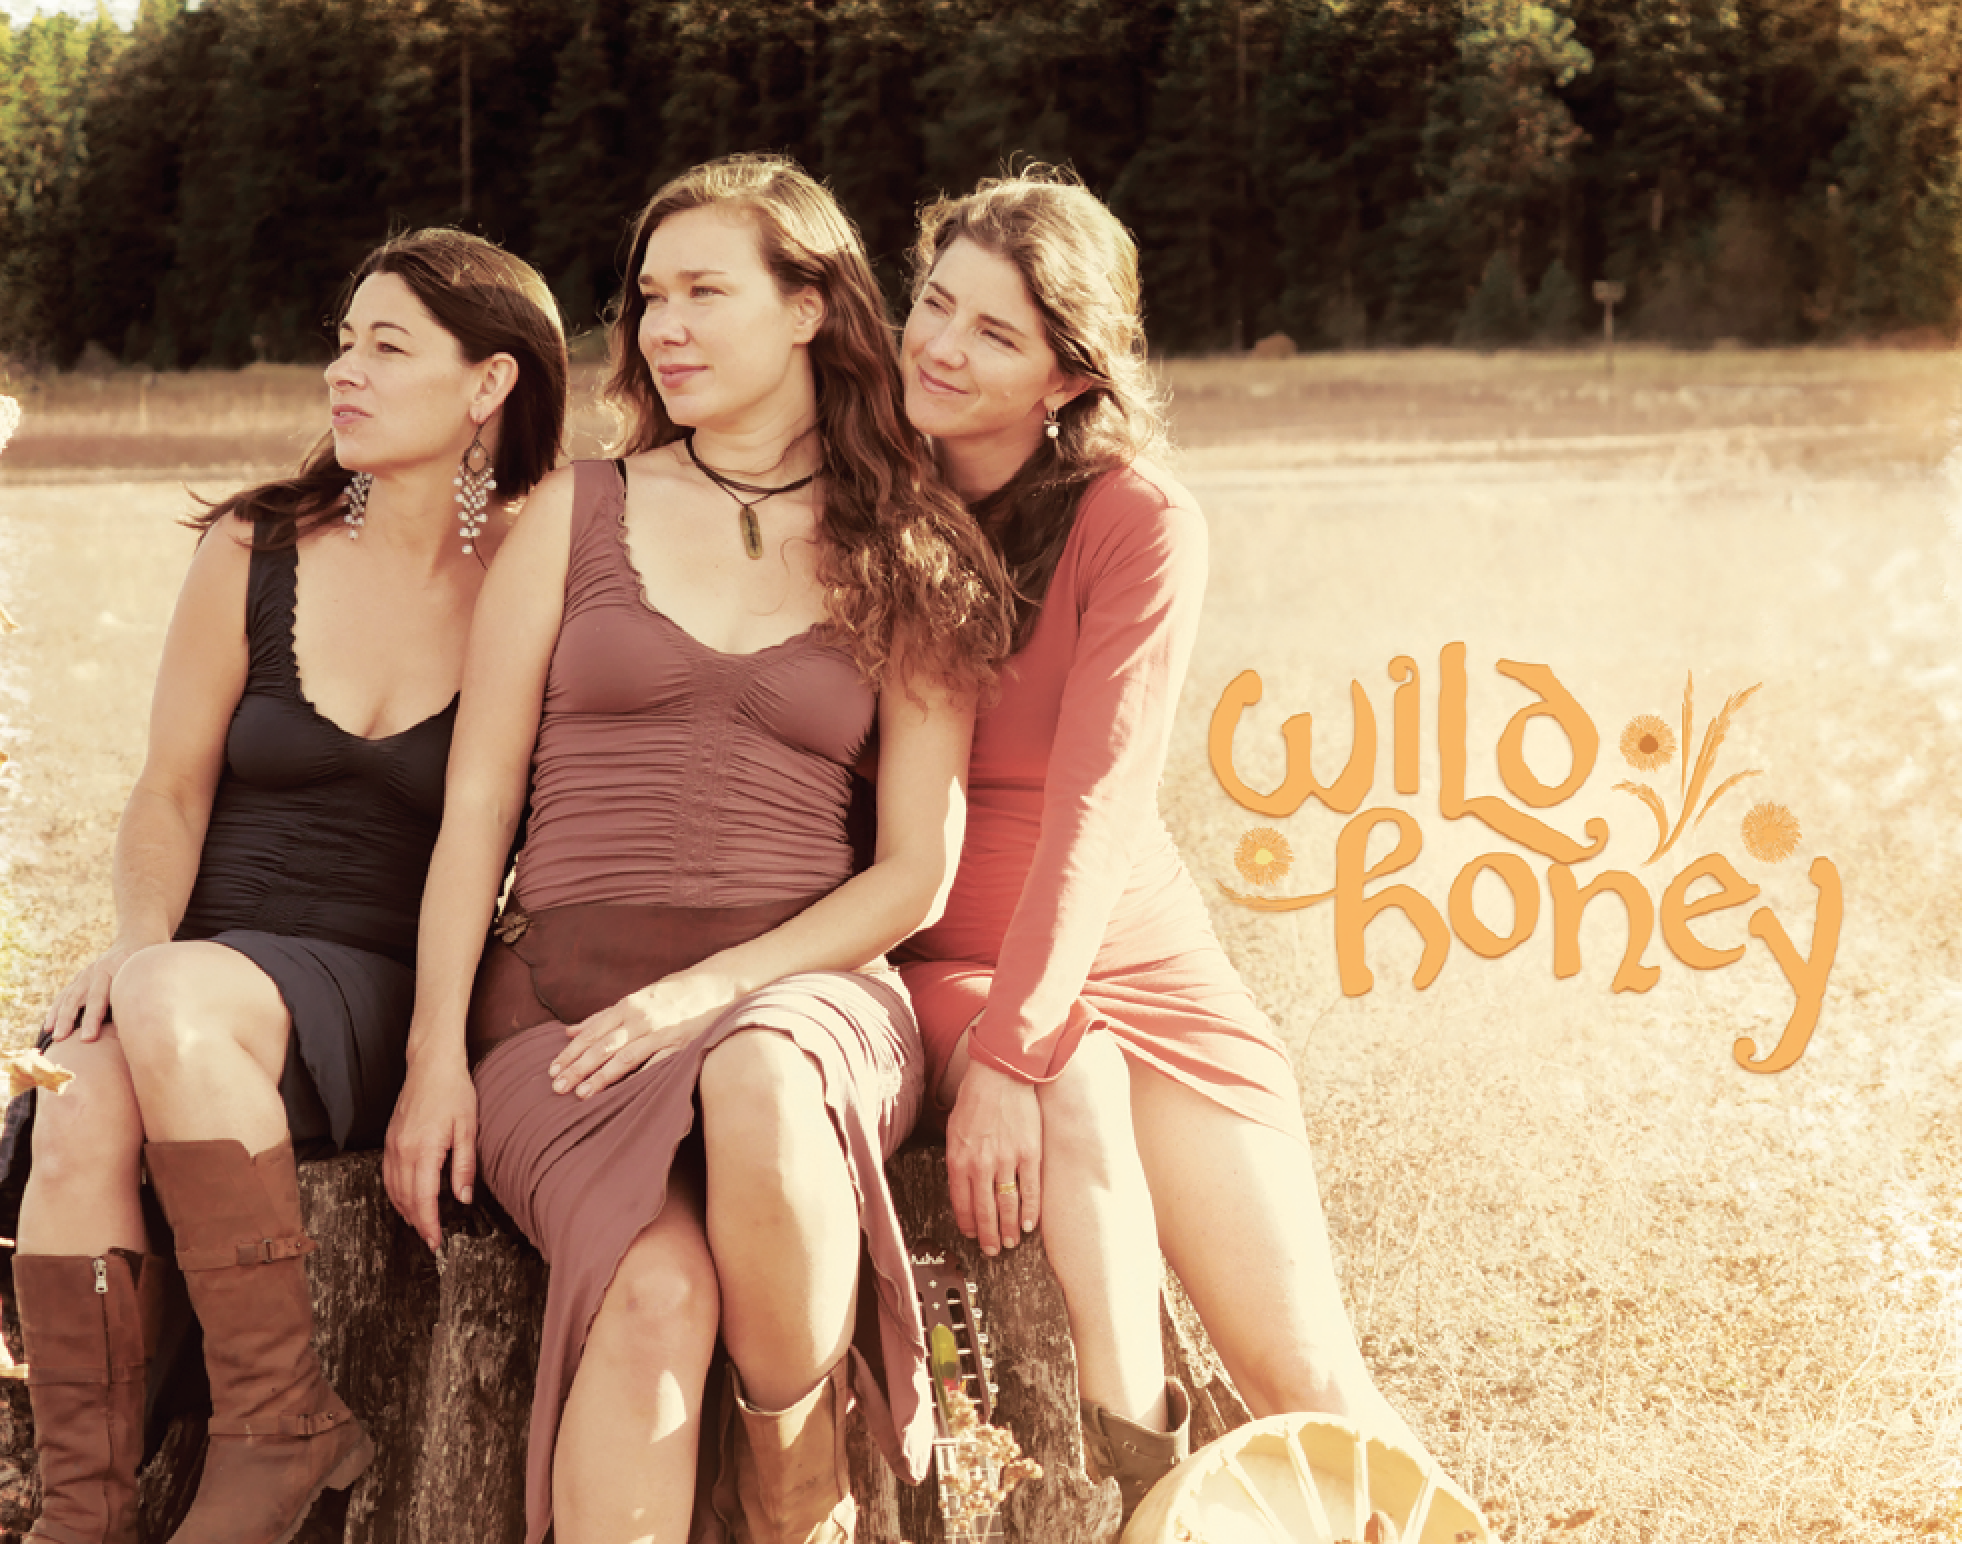 Wild Honey – CD Release Concert – April 14th at 7:30 PM – First United Methodist Church